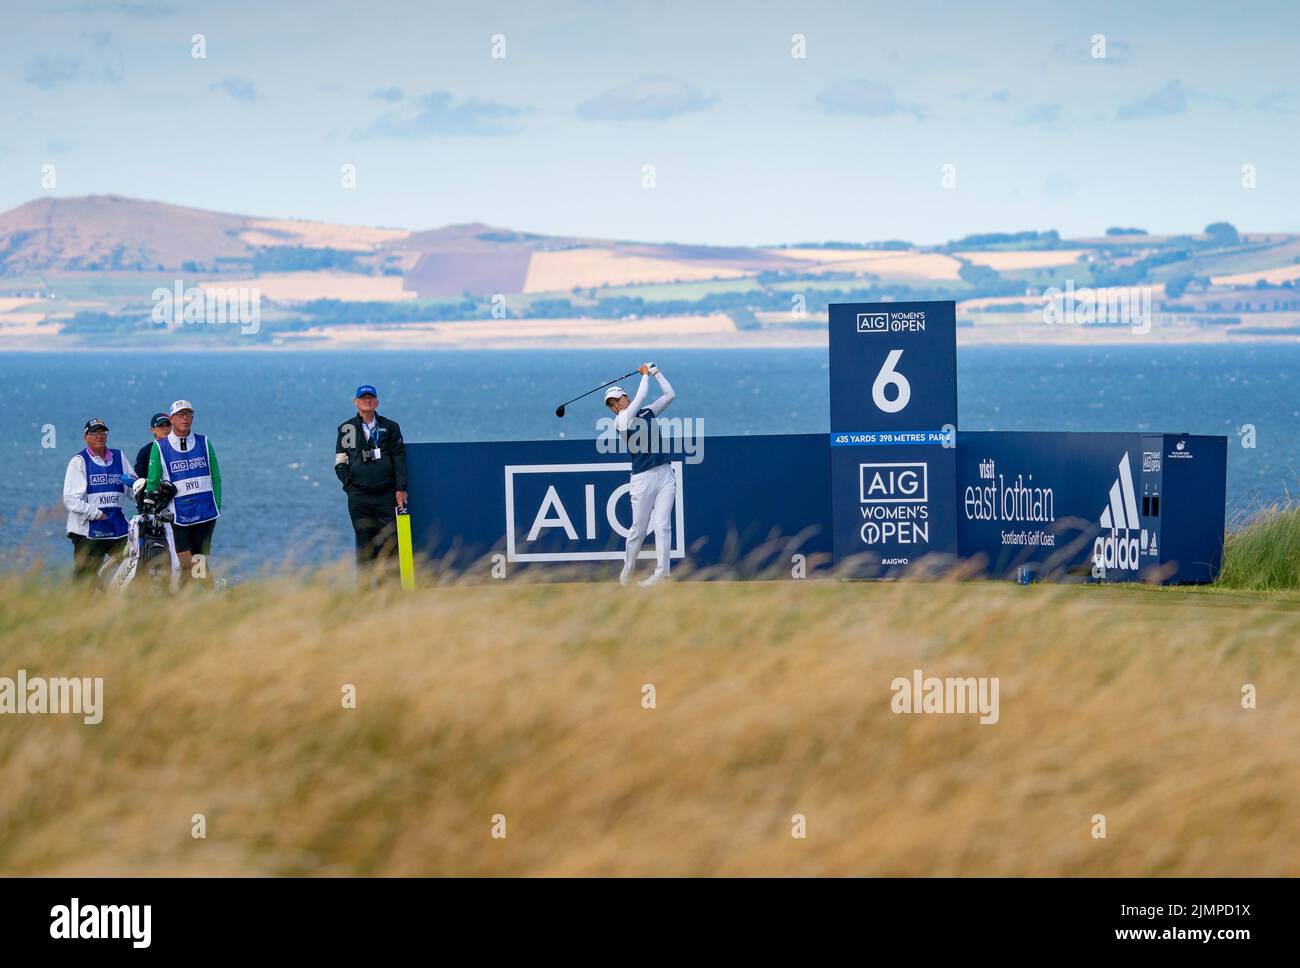 Gullane, Scotland, UK. 7th August 2022. Final  round of the AIG Women’s Open golf championship at Muirfield in East Lothian. Pic;  Soyeon Ryu tees off on the Sixth hole. Iain Masterton/Alamy Live News Stock Photo